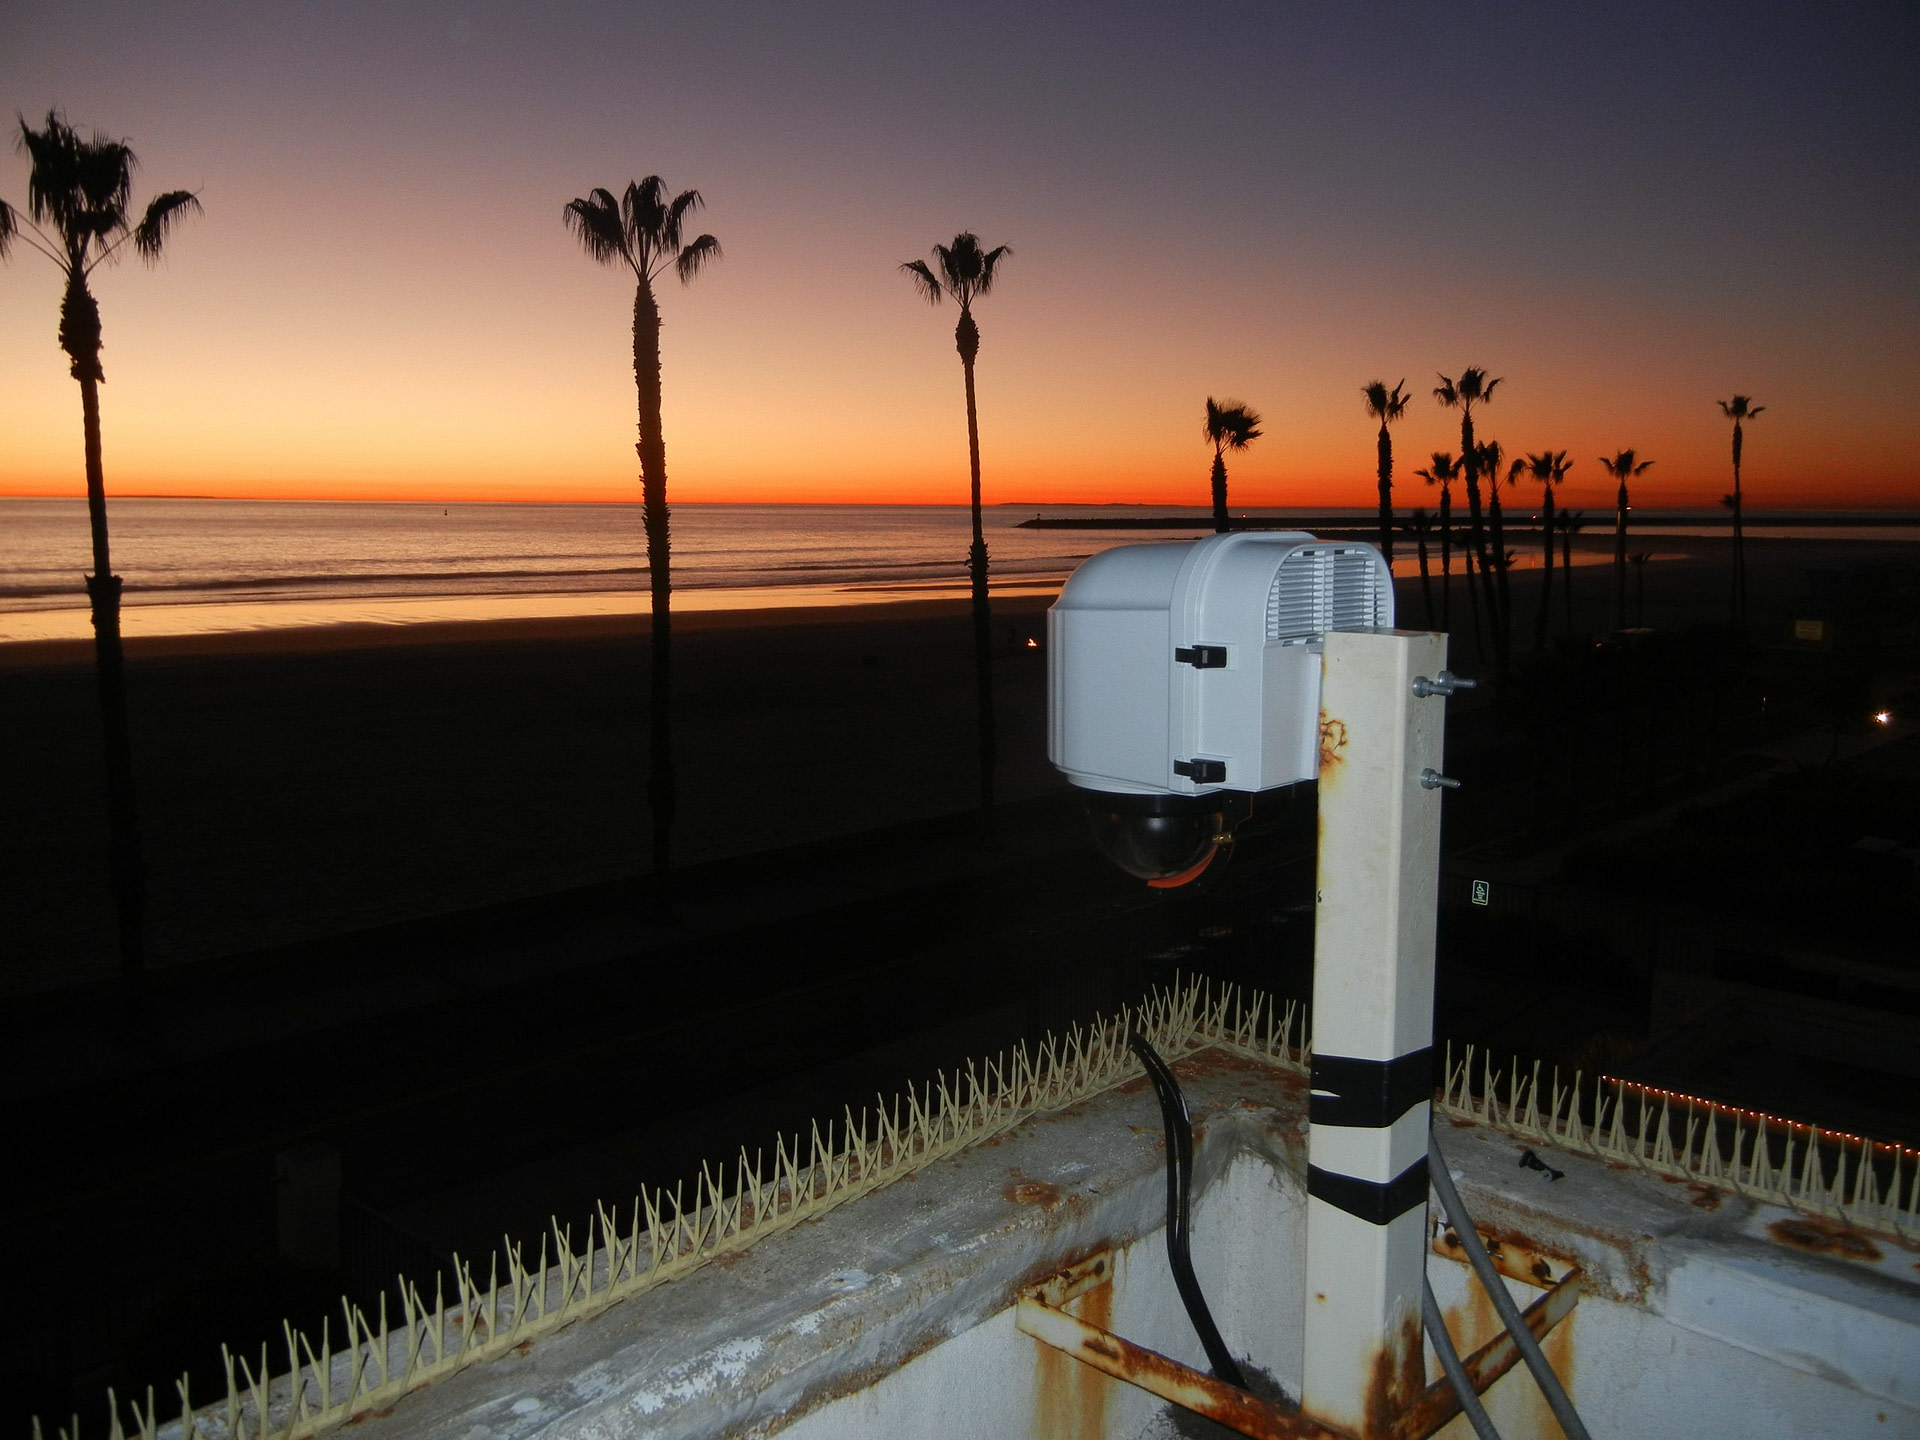 XClear Self Cleaning Camera Enclosure System Installed In Oceanside California Overlooking The Surf During Sunset 